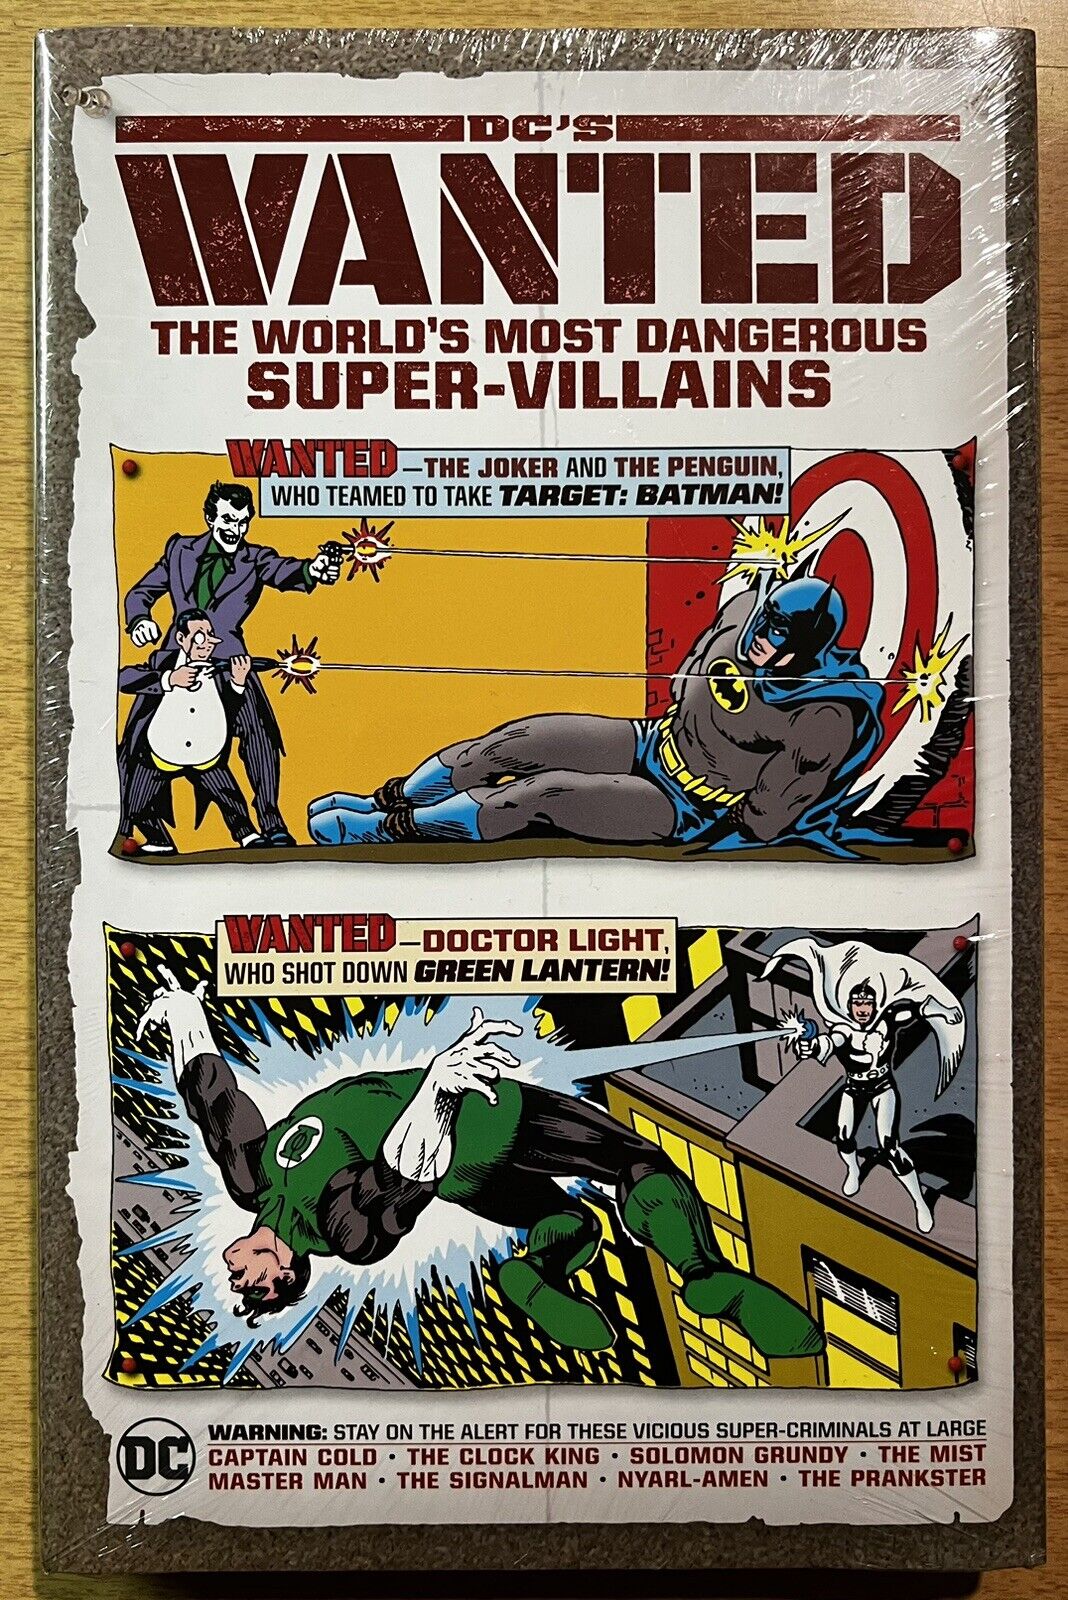 DC'S WANTED: THE WORLD'S MOST DANGEROUS SUPER-VILLAINS Hardcover Sealed